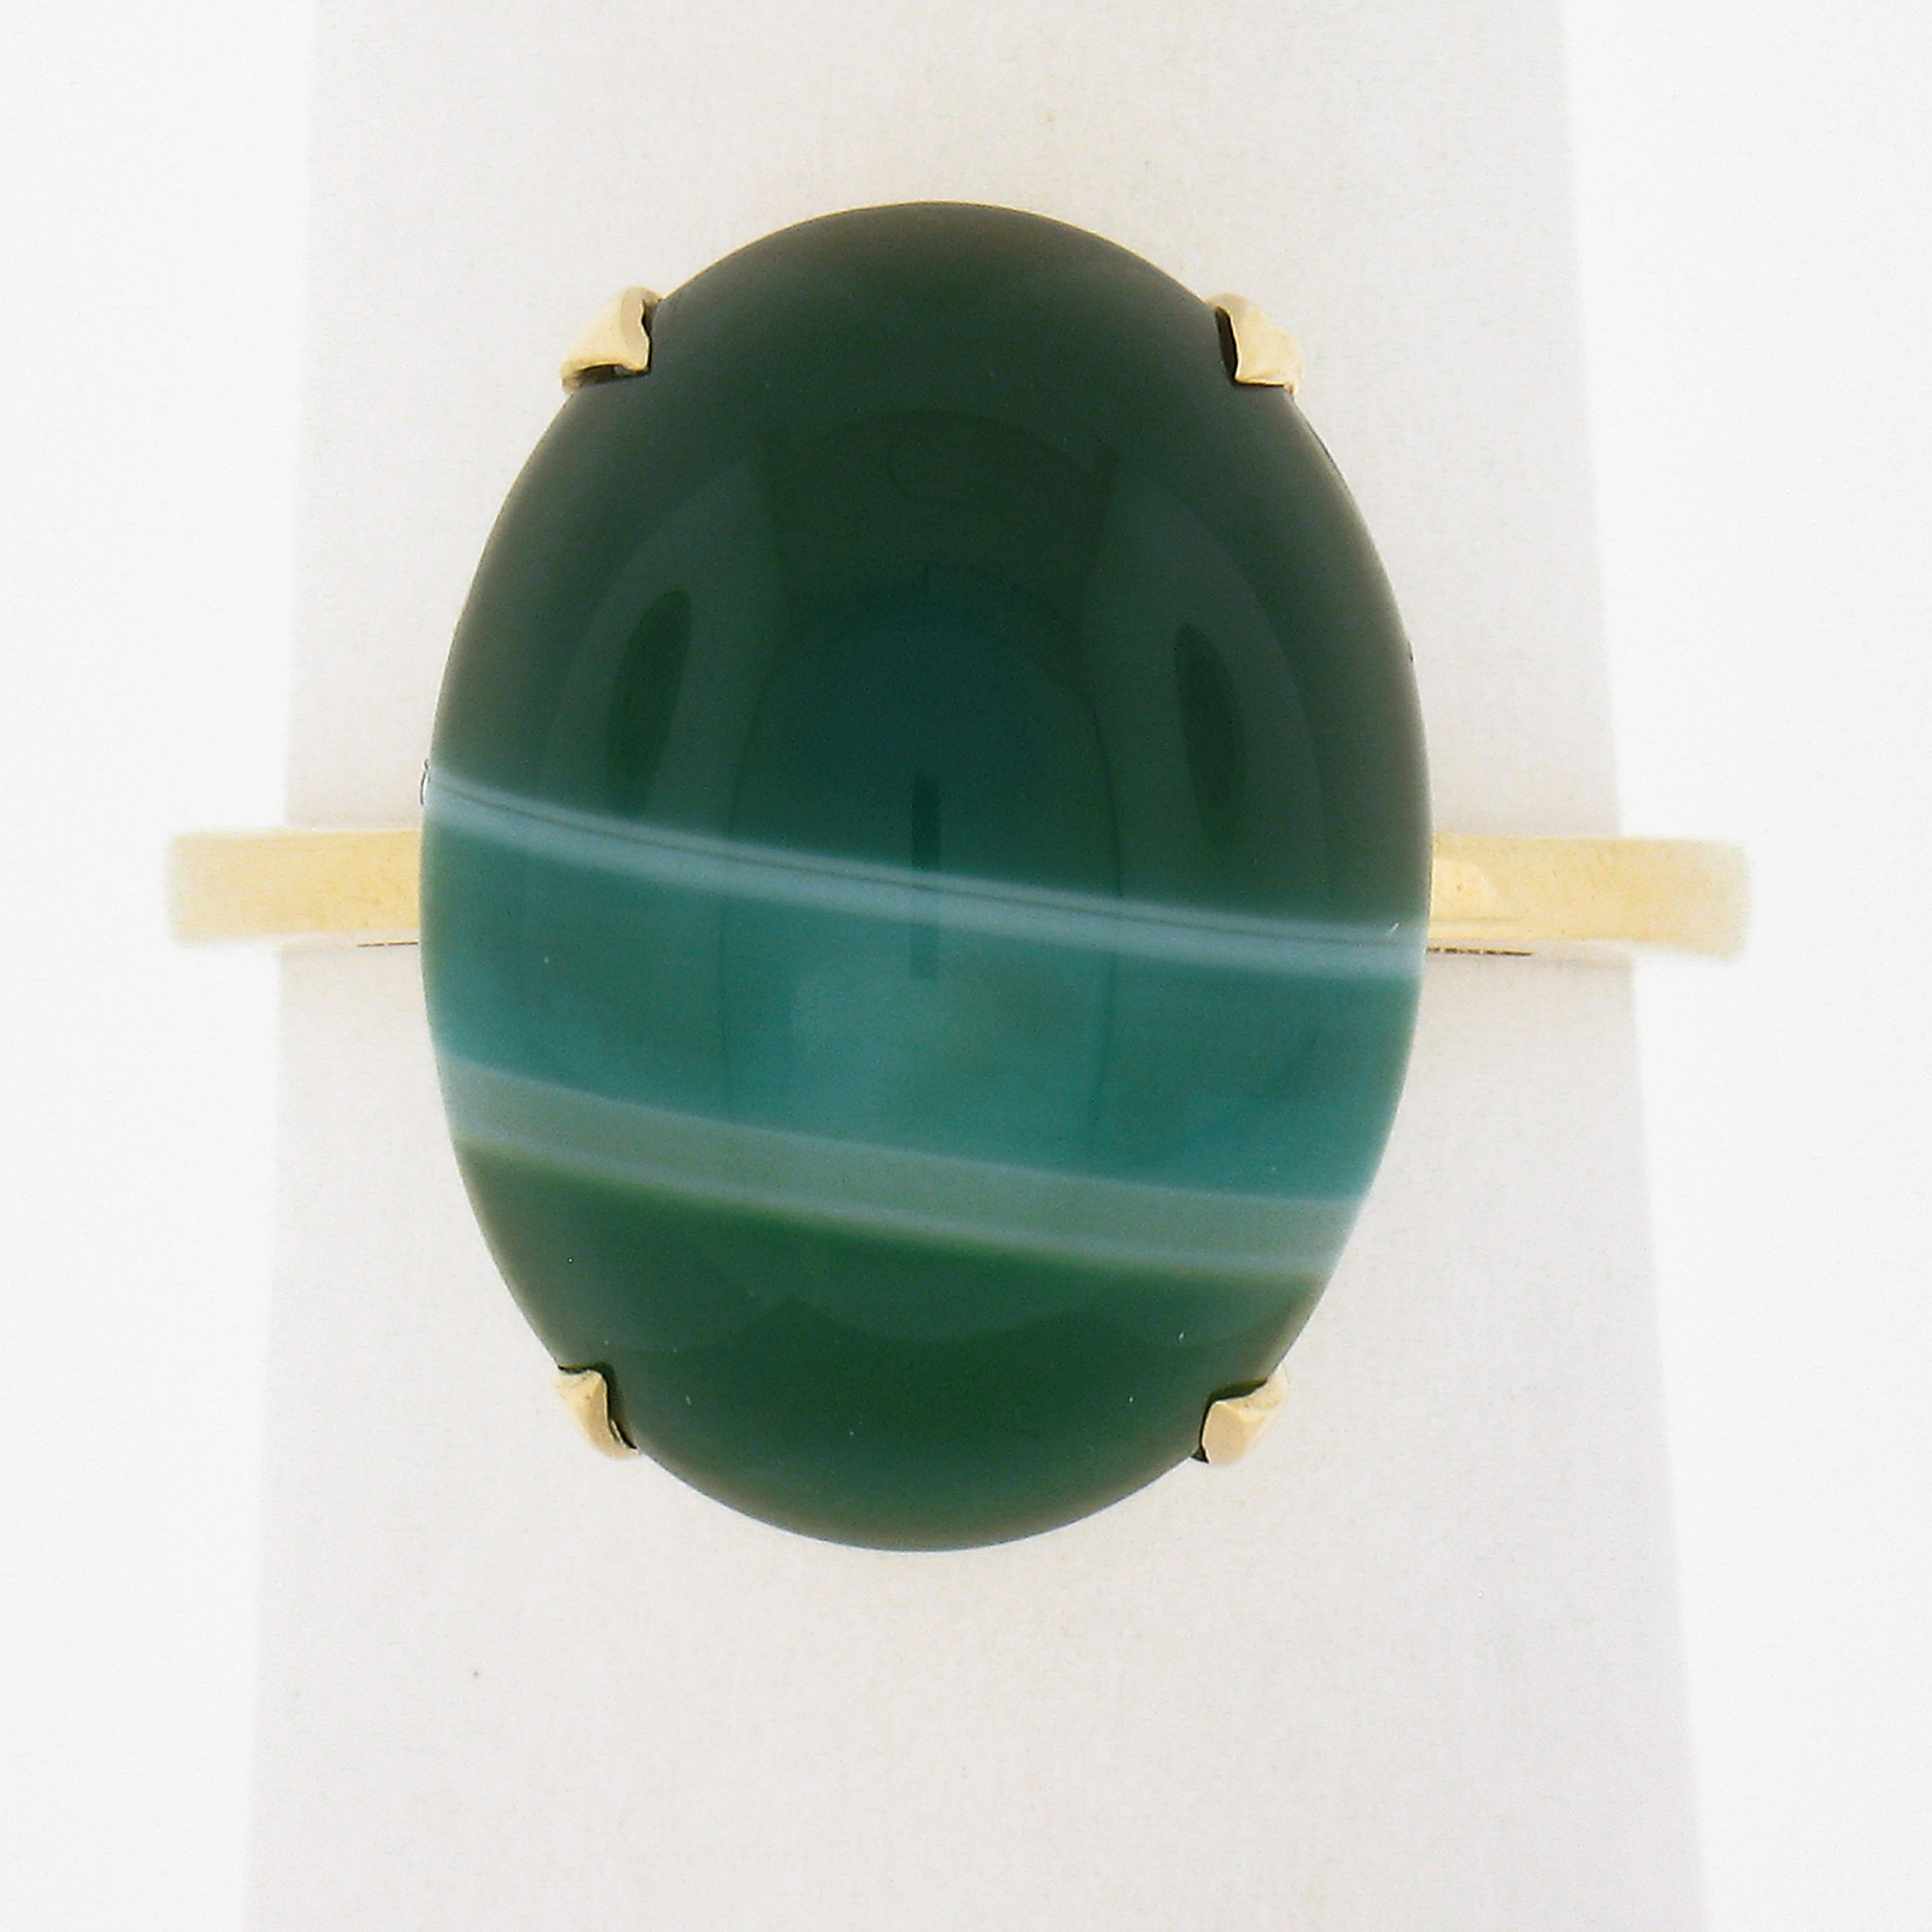 This classy solitaire ring was crafted in solid 14k yellow gold features an adorable oval cabochon banded agate neatly prong set at its center. The agate shows a wonderful green color with white lines. This ring is in like new condition and is a